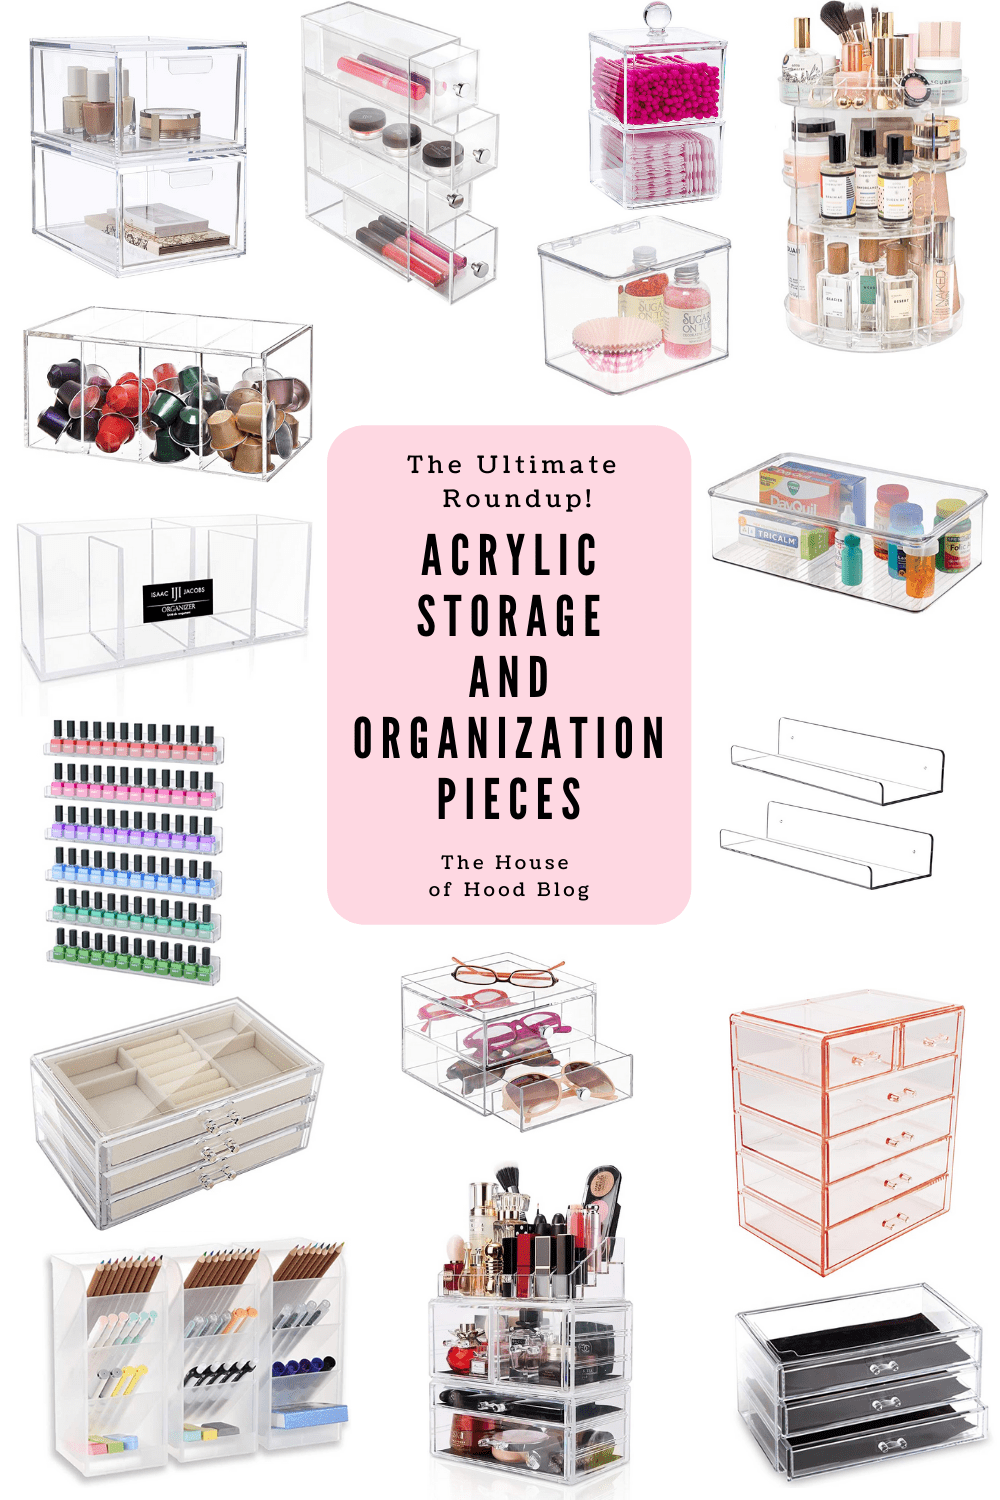 https://thehouseofhoodblog.com/wp-content/uploads/2020/06/Acrylic-Storage-and-Organization.png